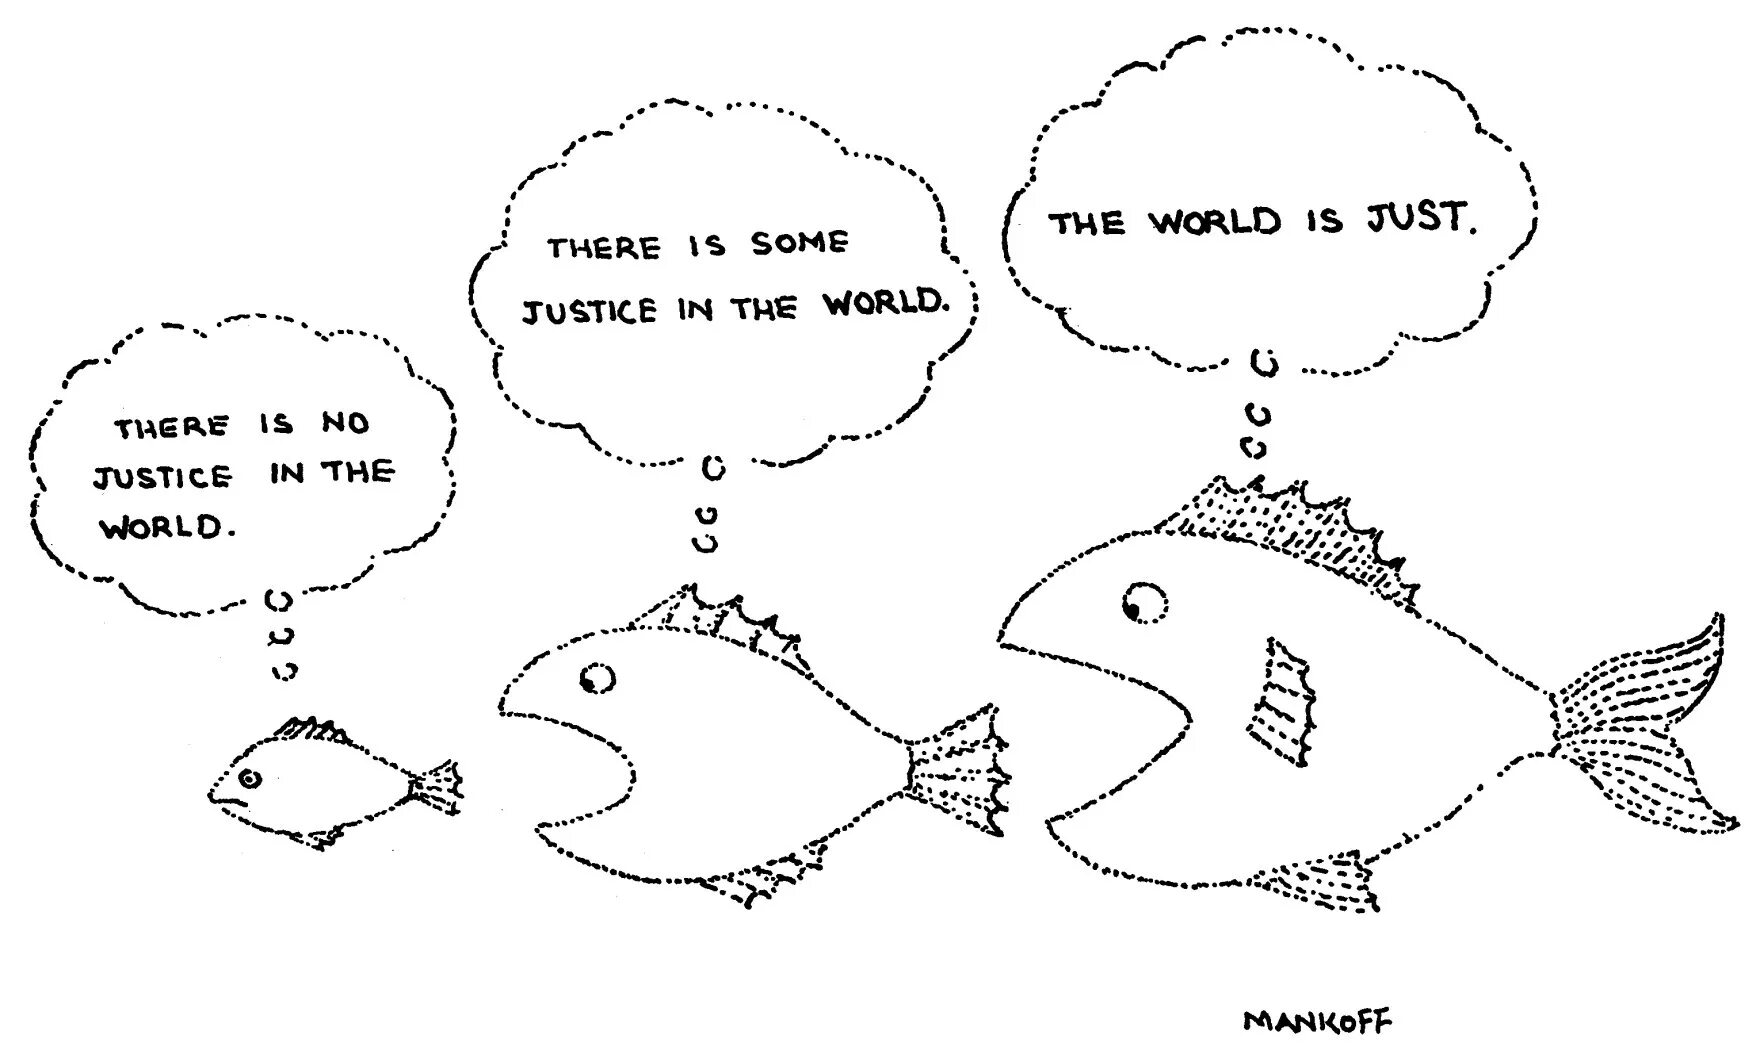 The world is funny. Just World. Anchoring bias картинки. The World is just с рыбками. Funny cartoon pictures.